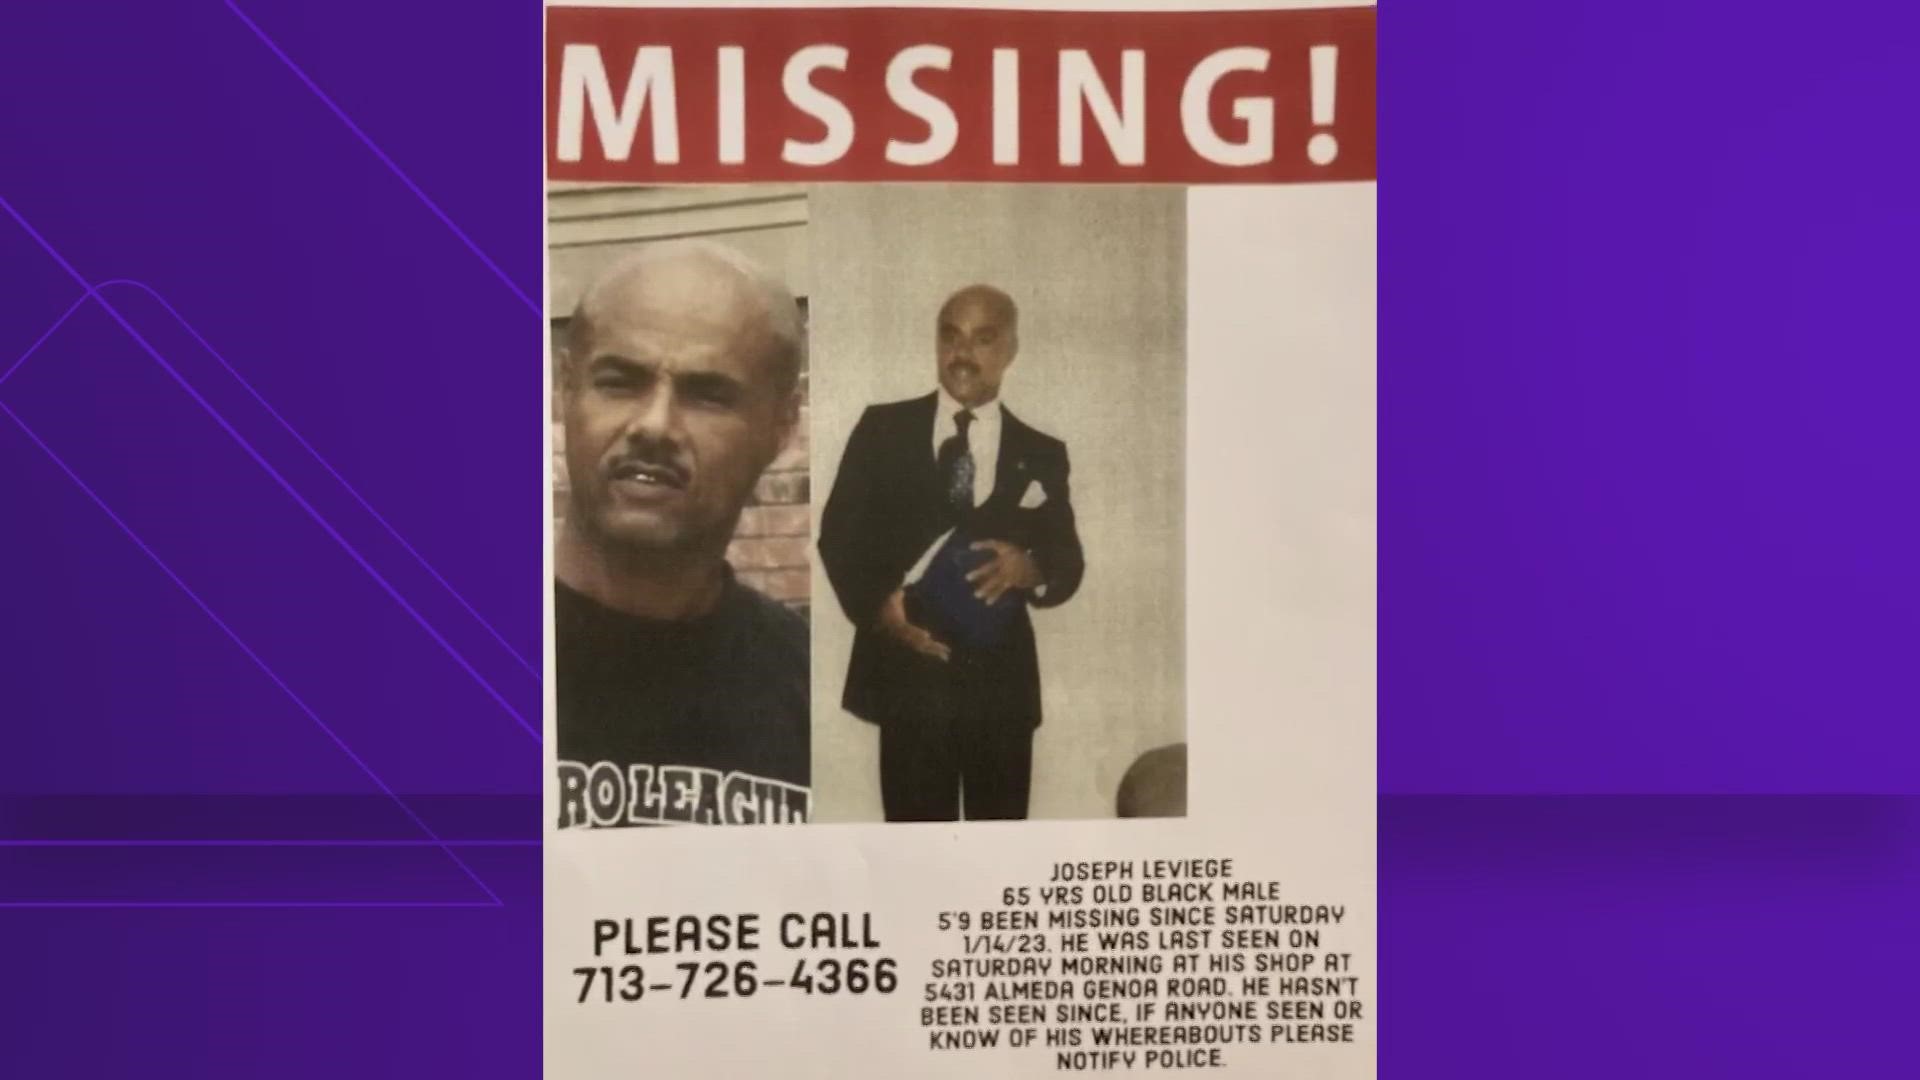 Joseph Lynn Leviege was last seen heading to work on Jan. 14. His car was later found damaged in the middle of the road a block away from his job.